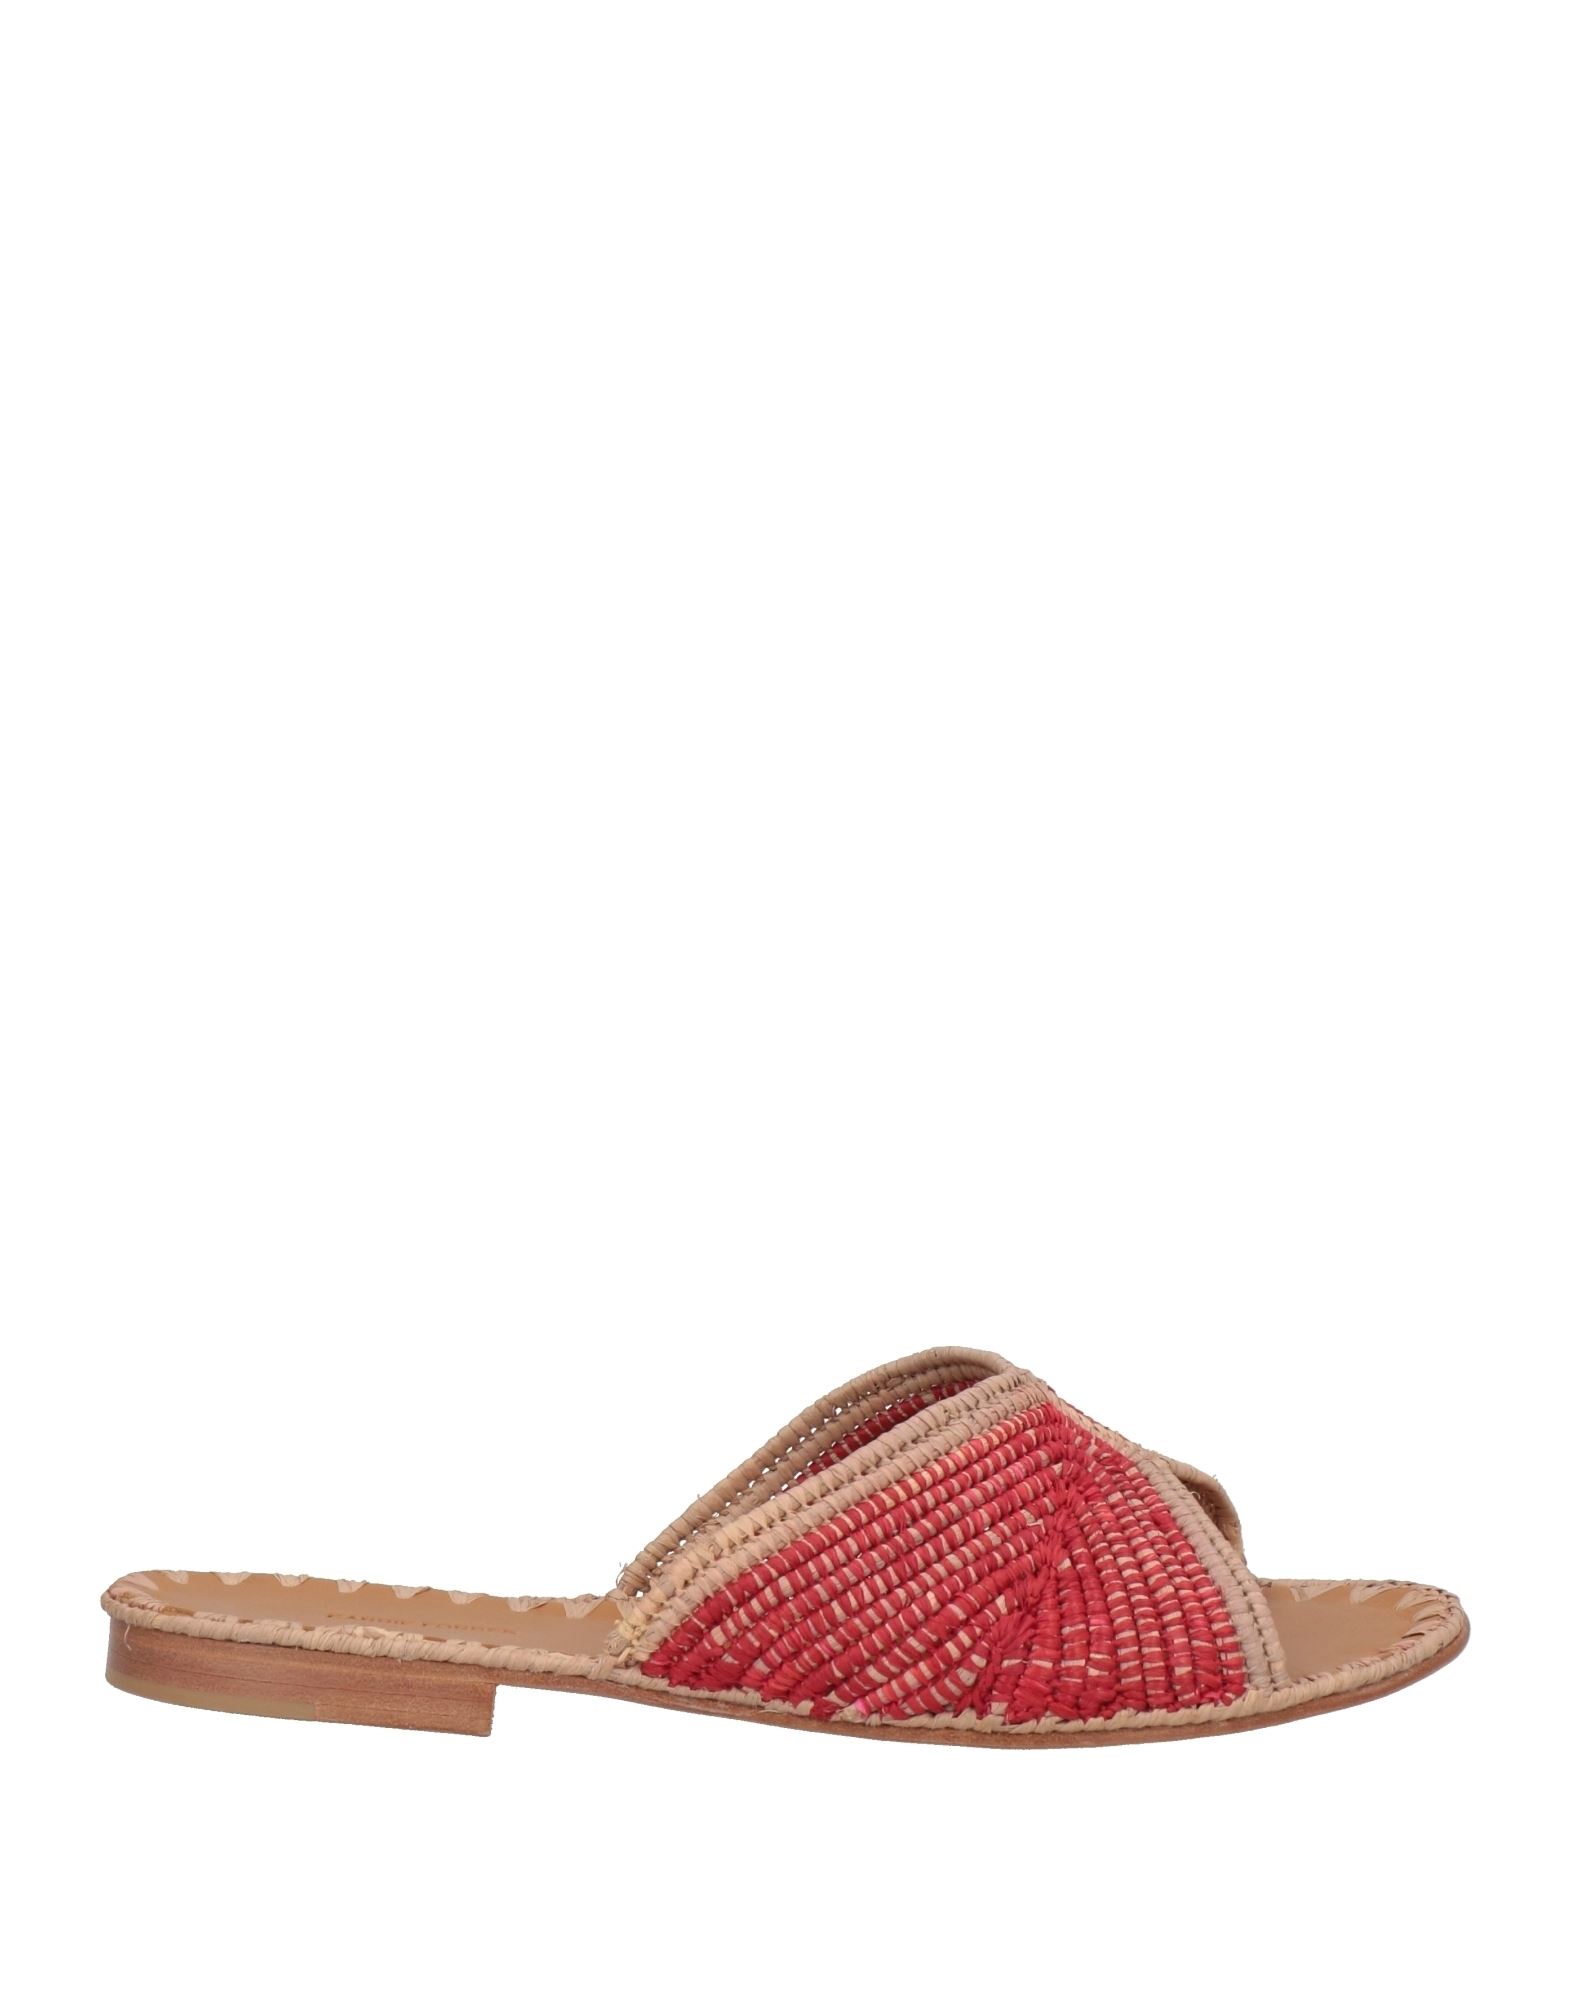 Carrie Forbes Sandals In Red